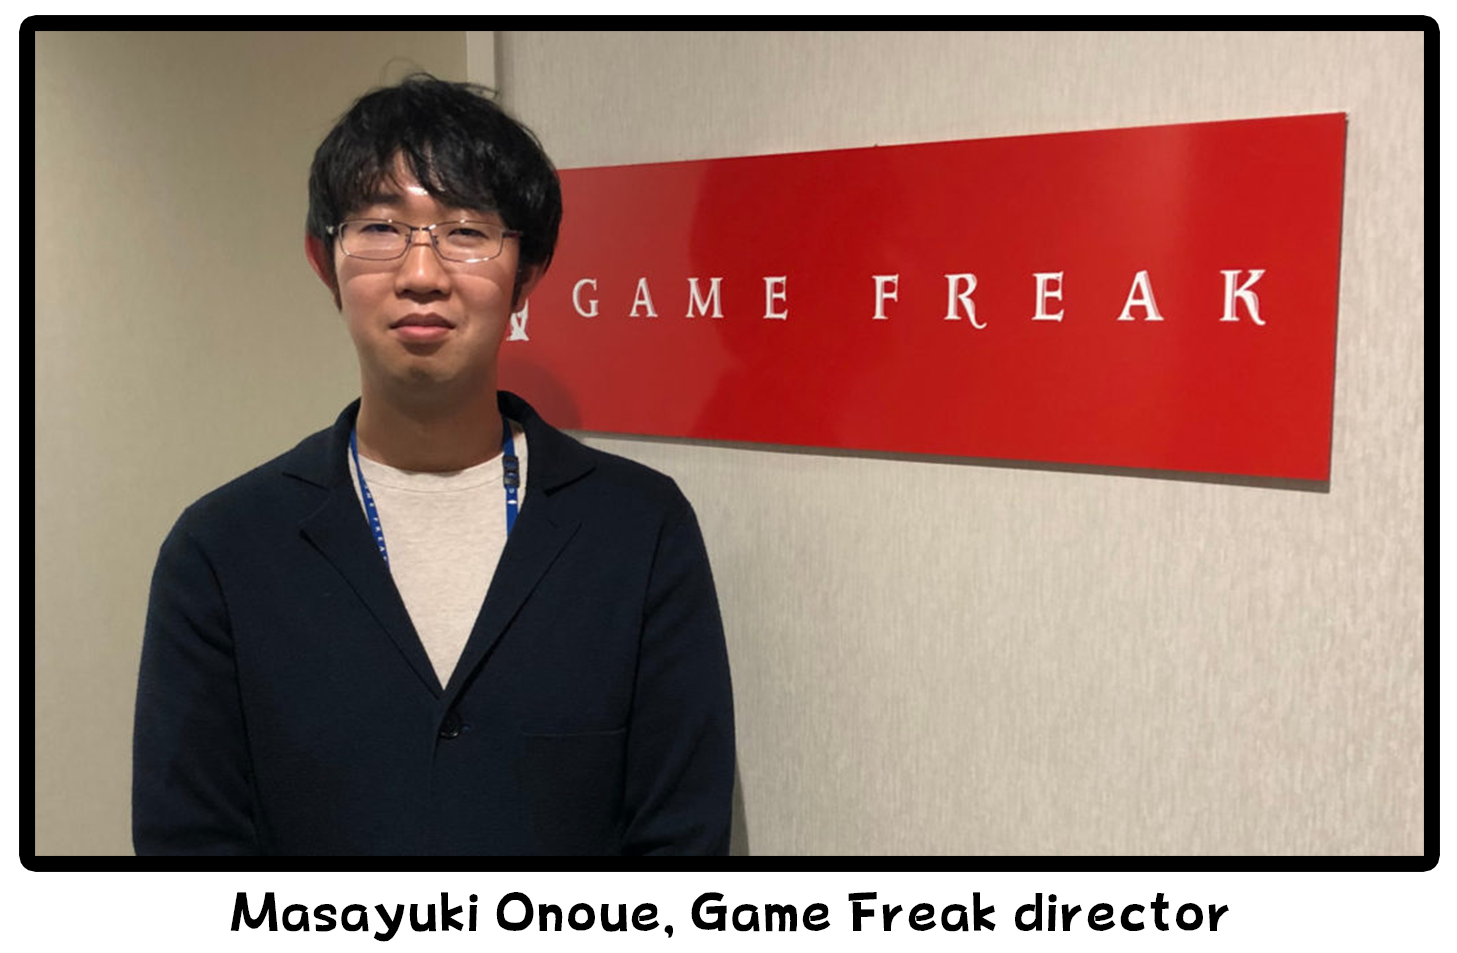 Plenty of information from the Famitsu interview with Shigeru